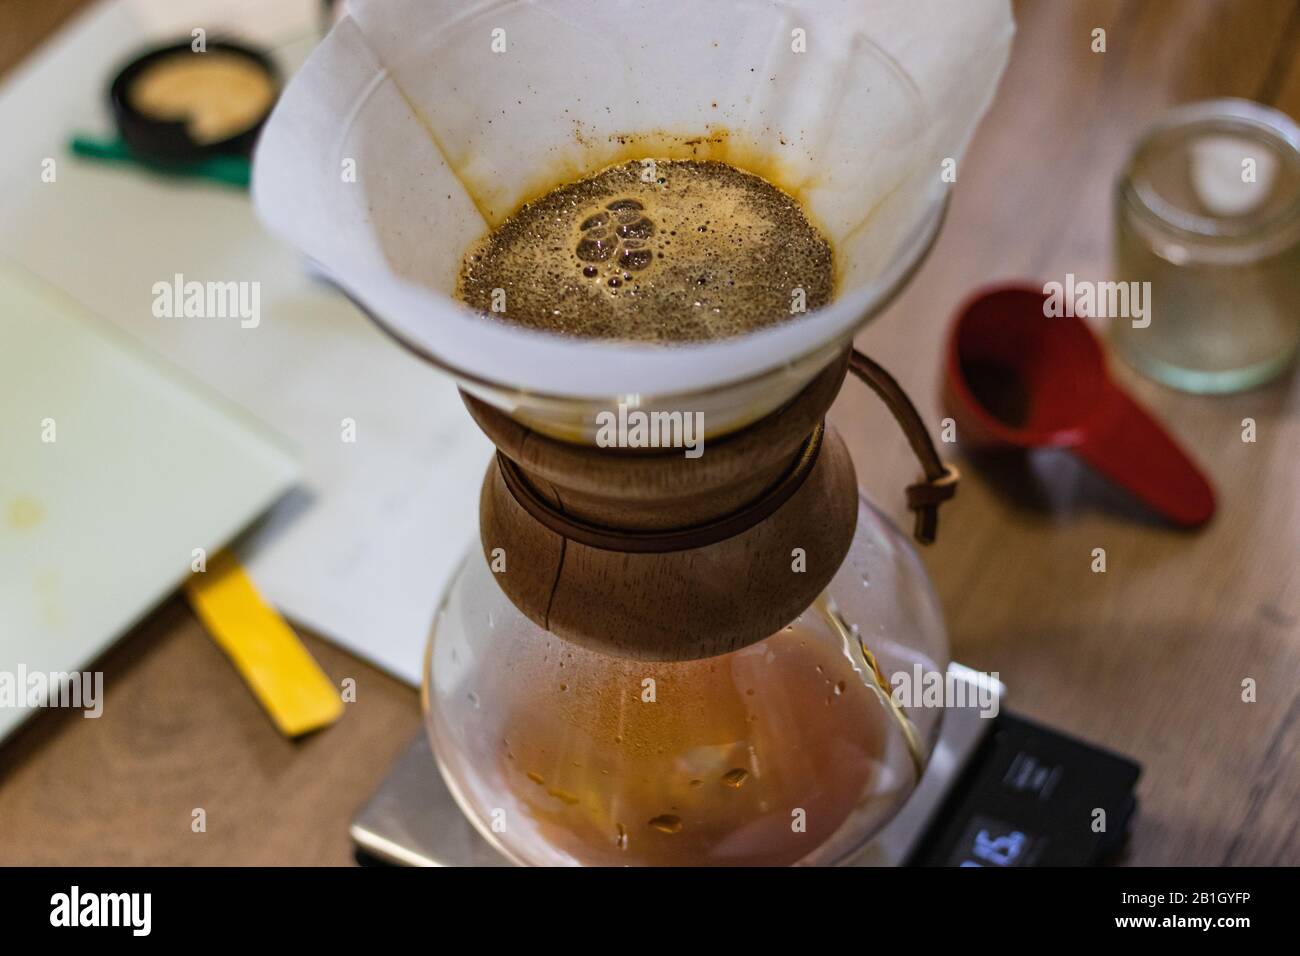 Alternative manual brewing of coffee on paper filter close up Stock Photo